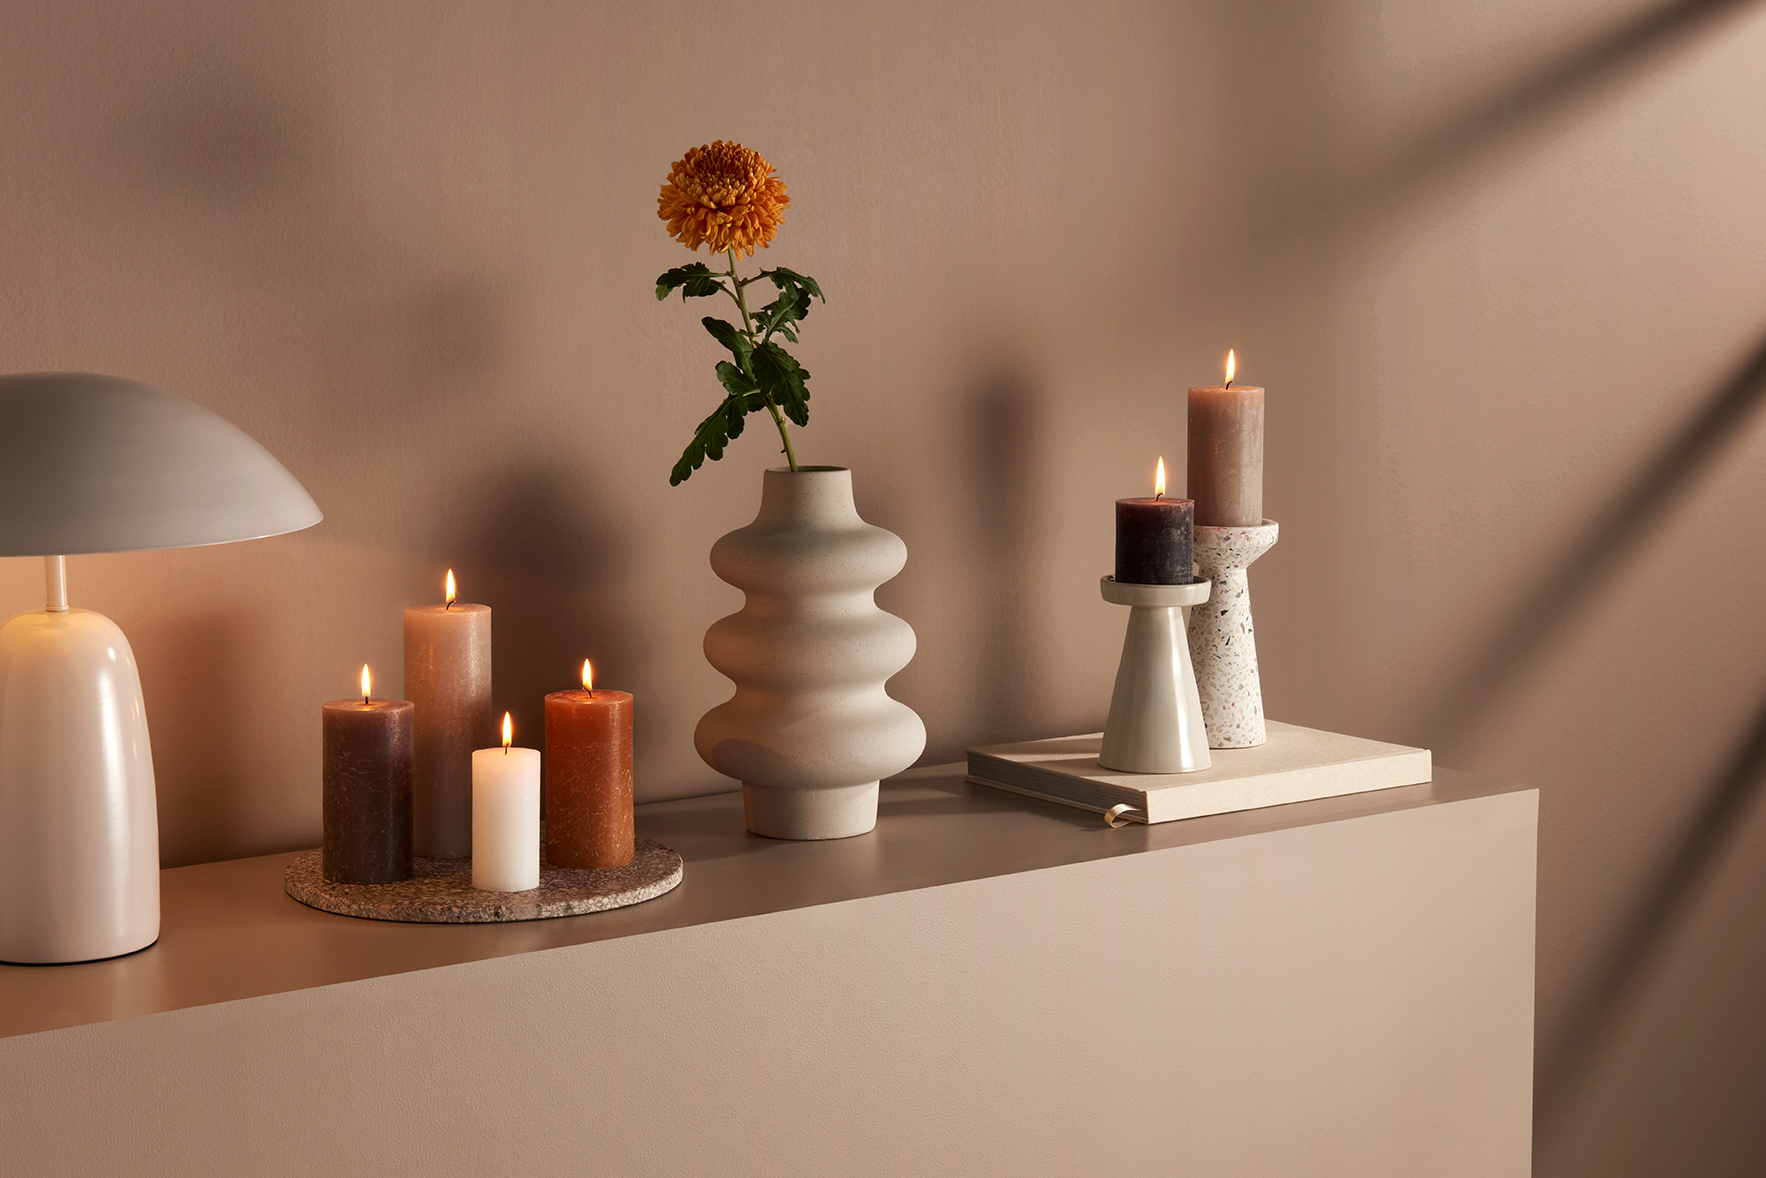 A cabinet with decoration pieces on it like a vase, lamp and candles from the brand Bolsius